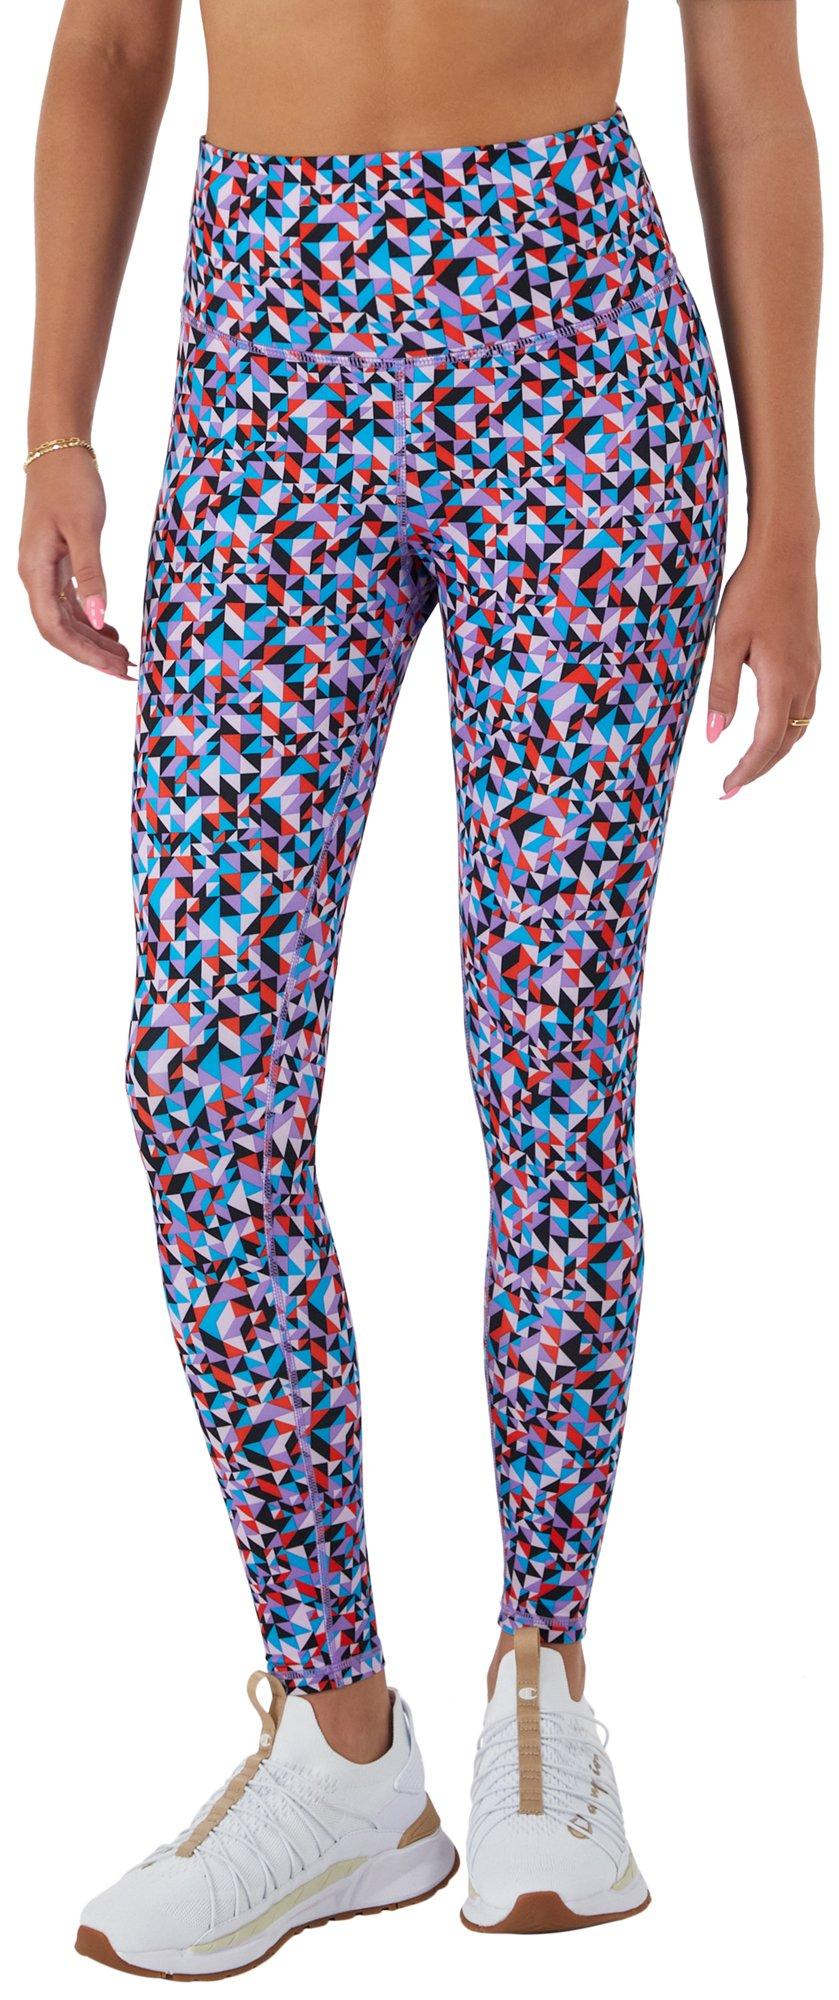 Champion Women's Authentic Women's Leggings, Authentic Graphic Tights,  Moisture-Wicking, 25